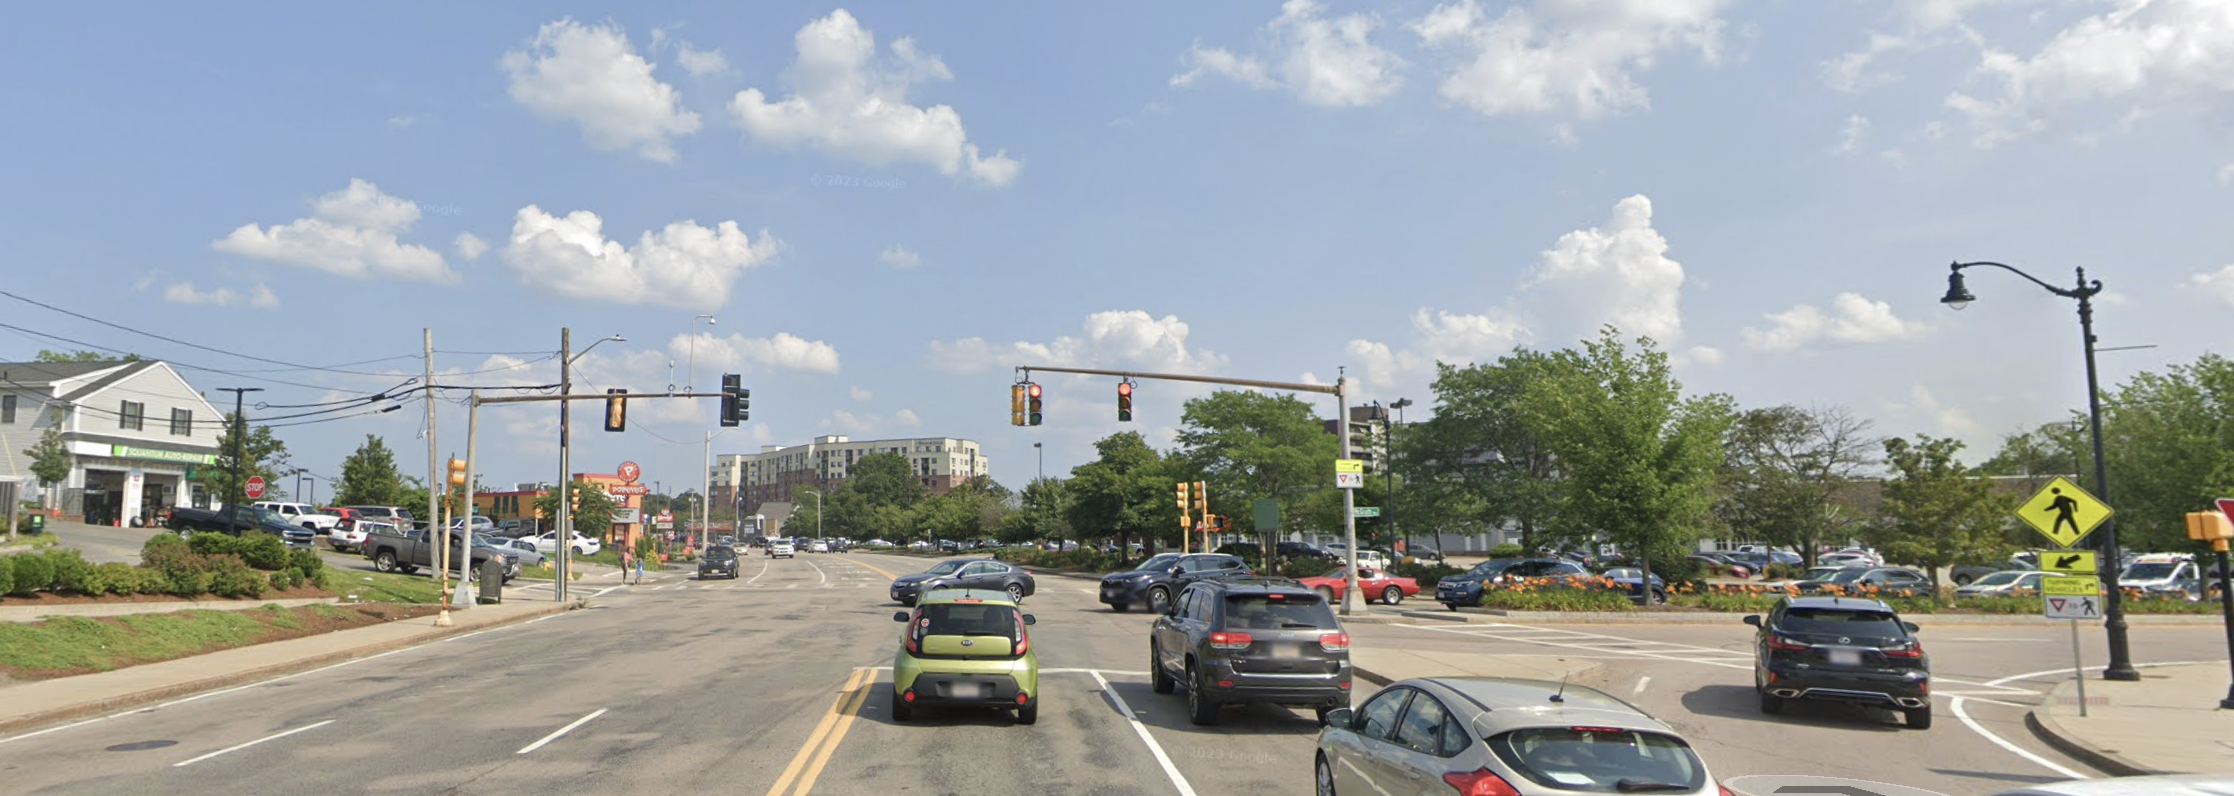 A Google Street View image of a wide intersection. In the foreground are five lanes of traffic with cars waiting at a red light. To the right is an intersecting multi-lane roadway. In the distance is a multi-story apartment building.